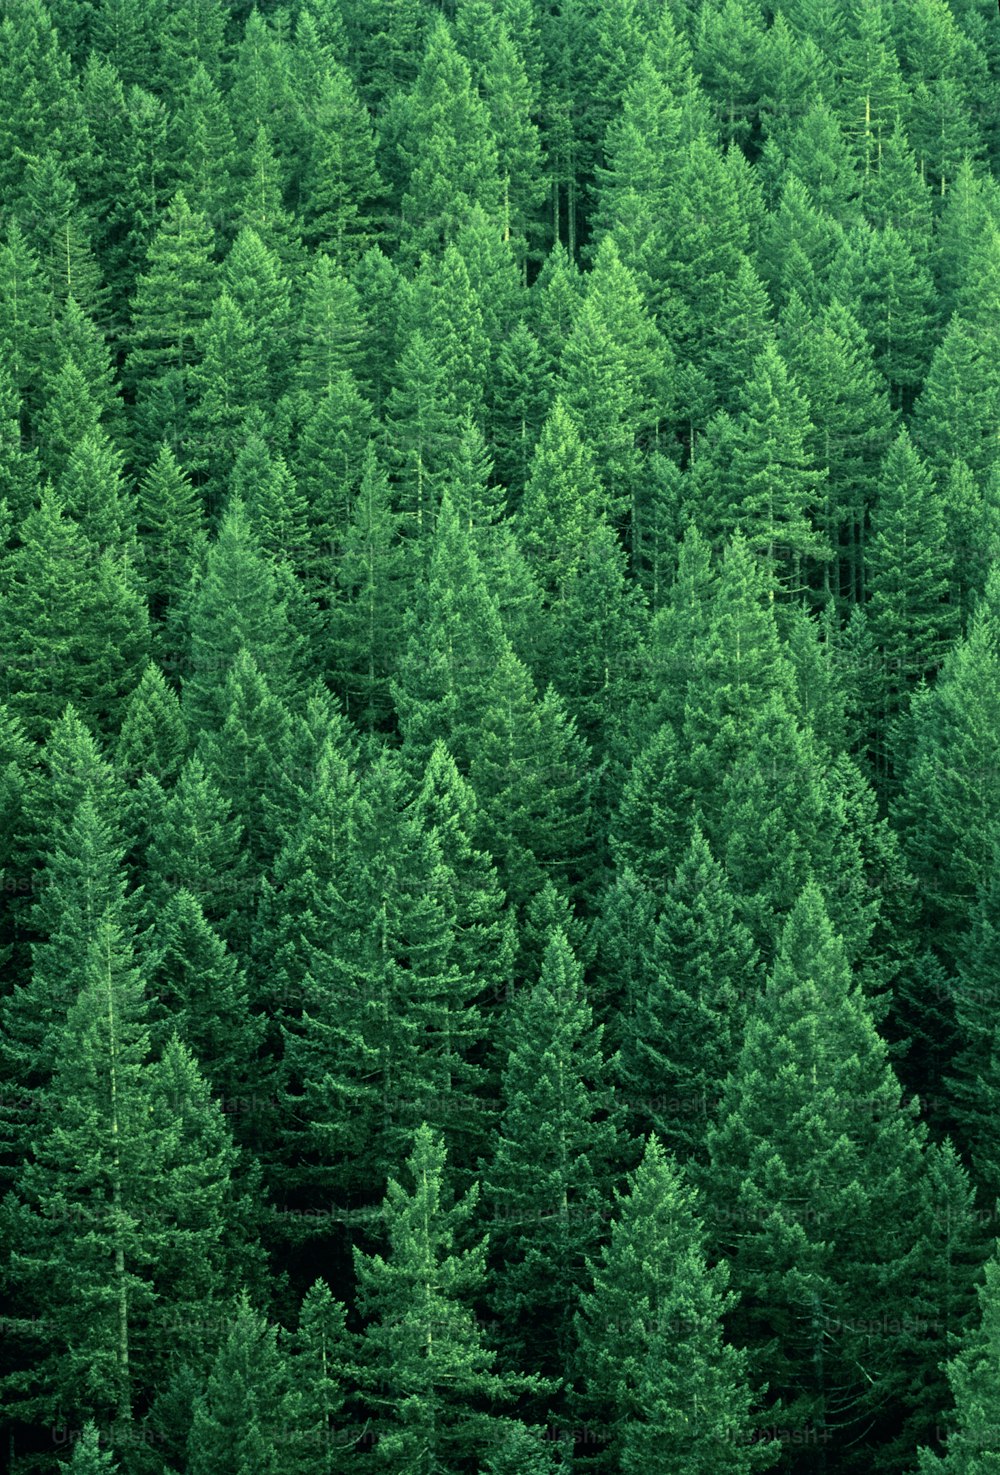 Firs belong to a genus of 39 species of coniferous trees. They are found throughout the northern hemisphere and several species are widely cultivated for their timber.